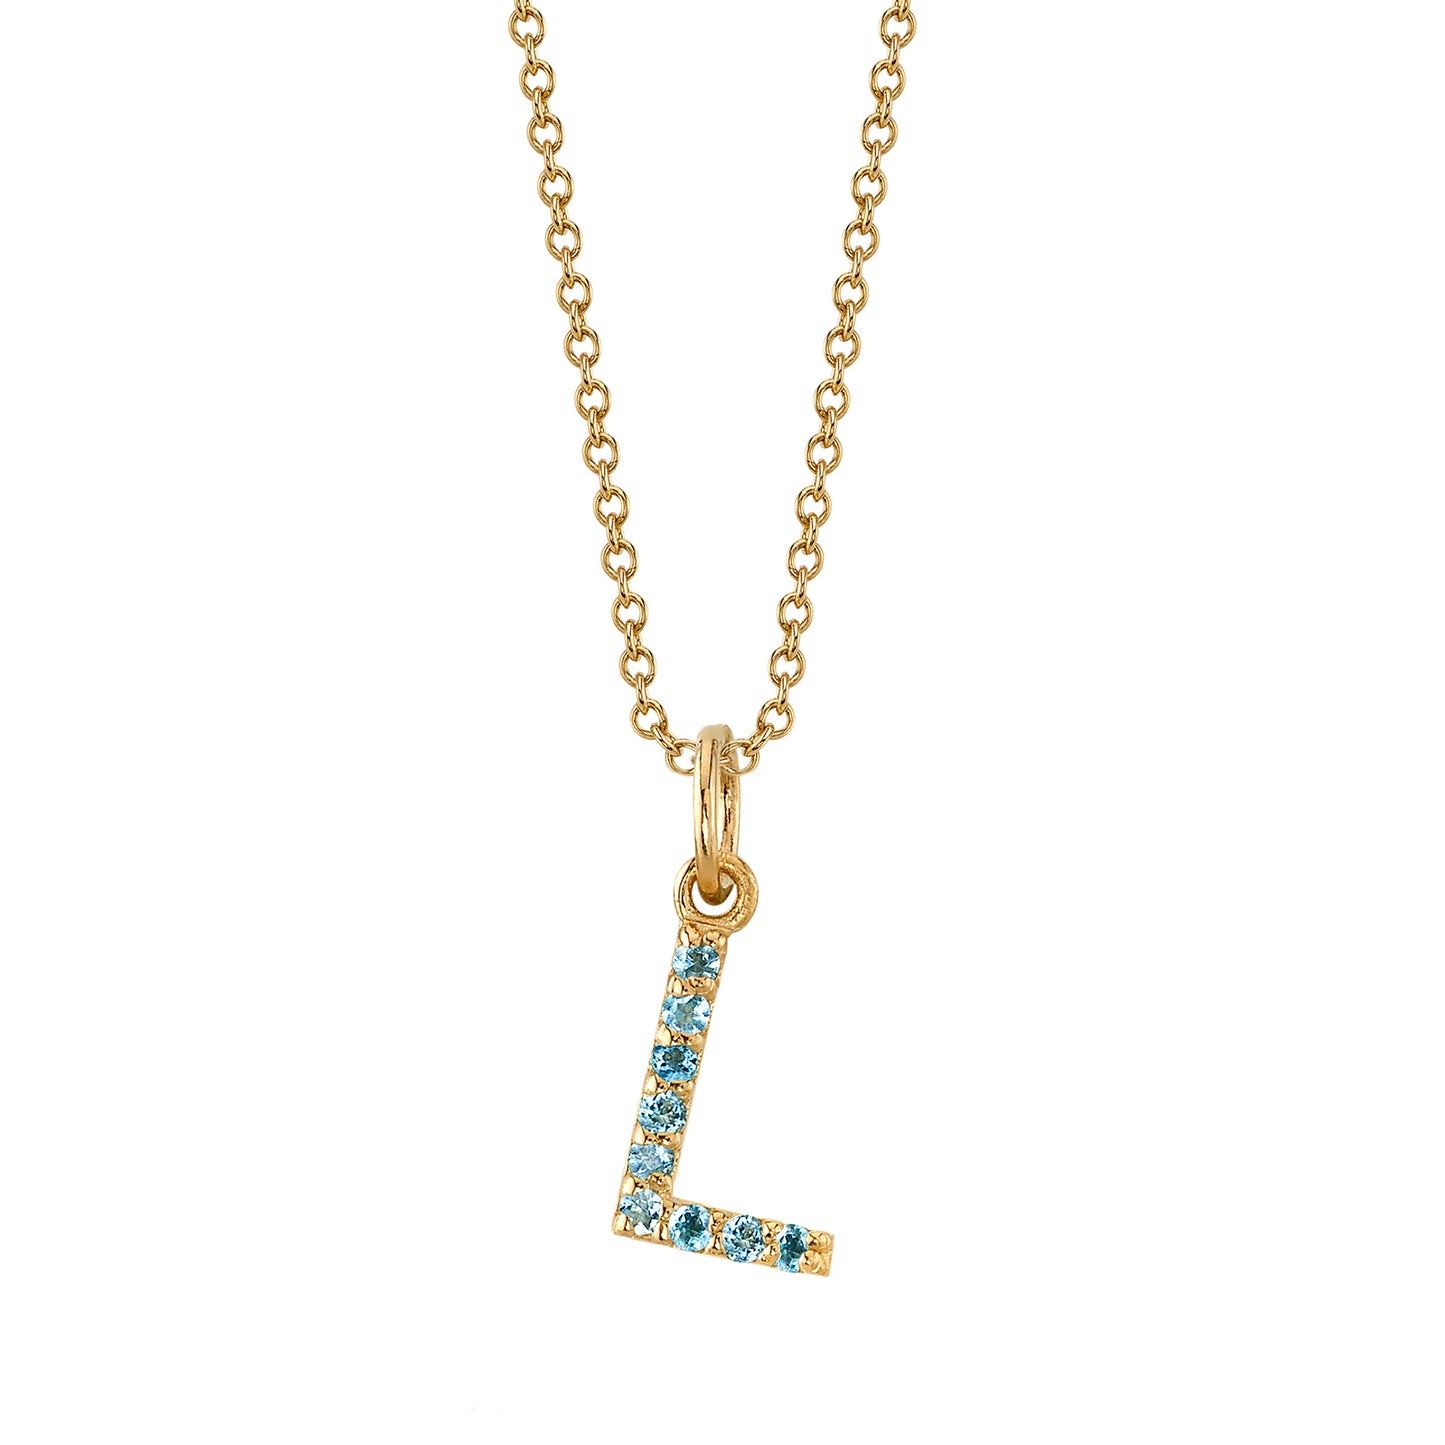 L Initial Birthstone Charm Necklace